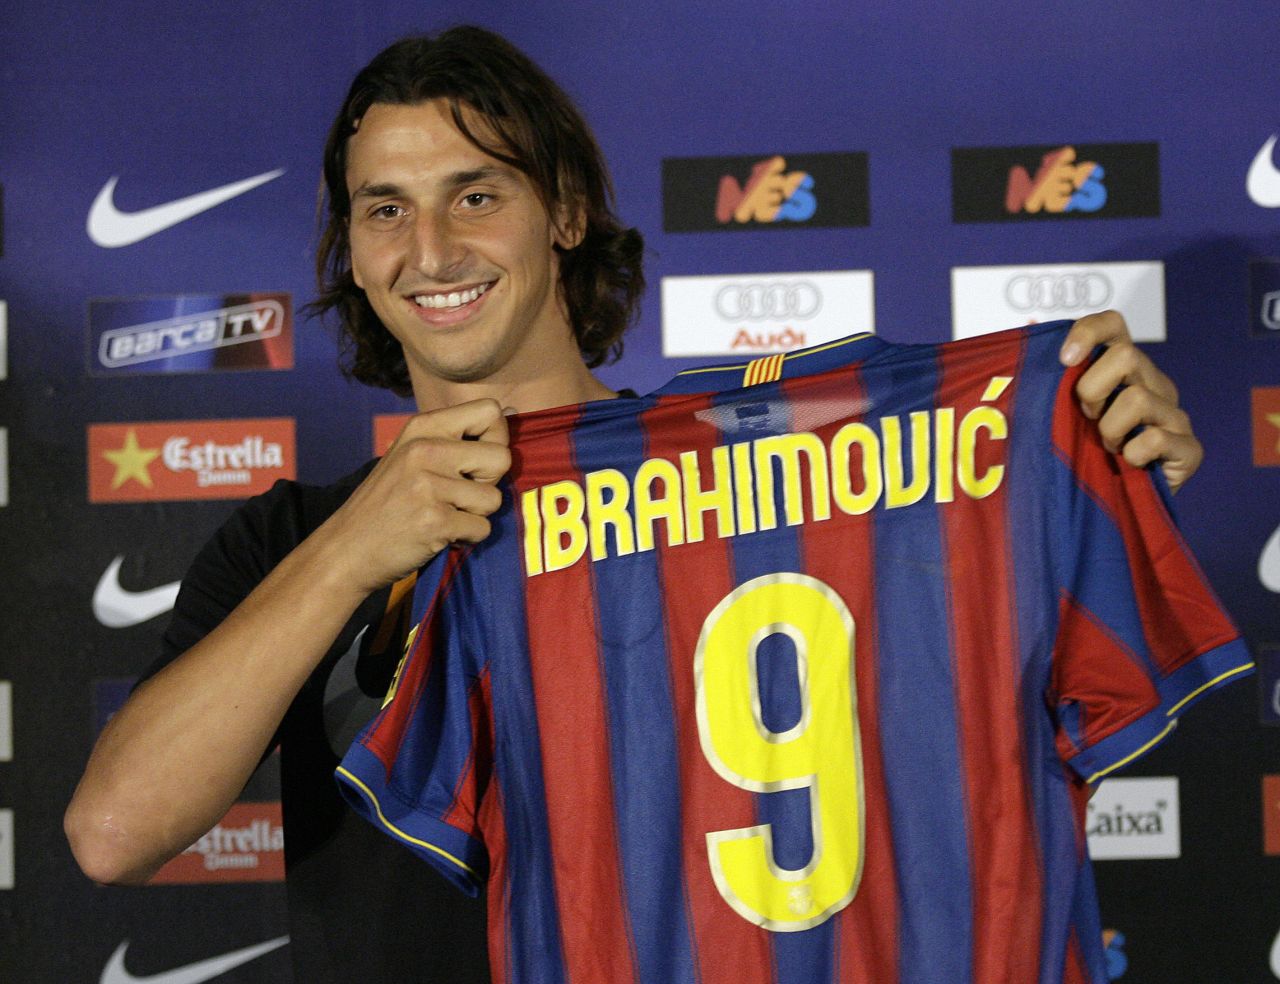 Zlatan Ibrahimovic moved to Real's archrivals Barcelona during the same transfer window. Barca paid Inter Milan a reported $65 million for the Sweden striker, but he lasted only one season before returning to Italy with AC Milan.